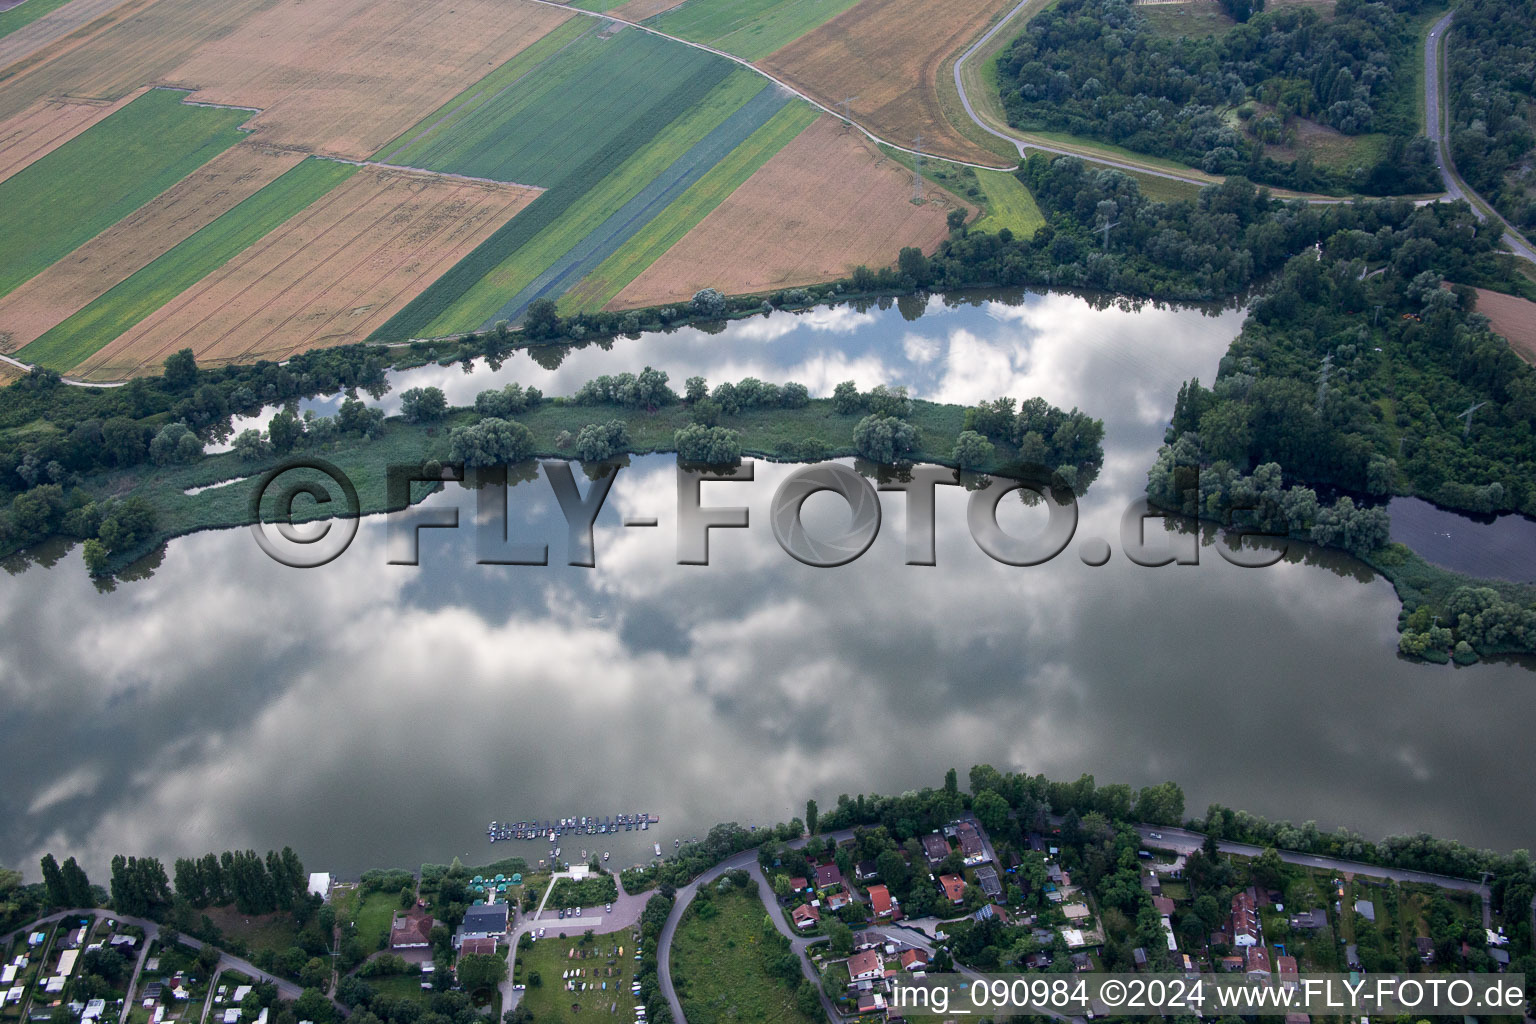 Blue Adriatic in Altrip in the state Rhineland-Palatinate, Germany viewn from the air